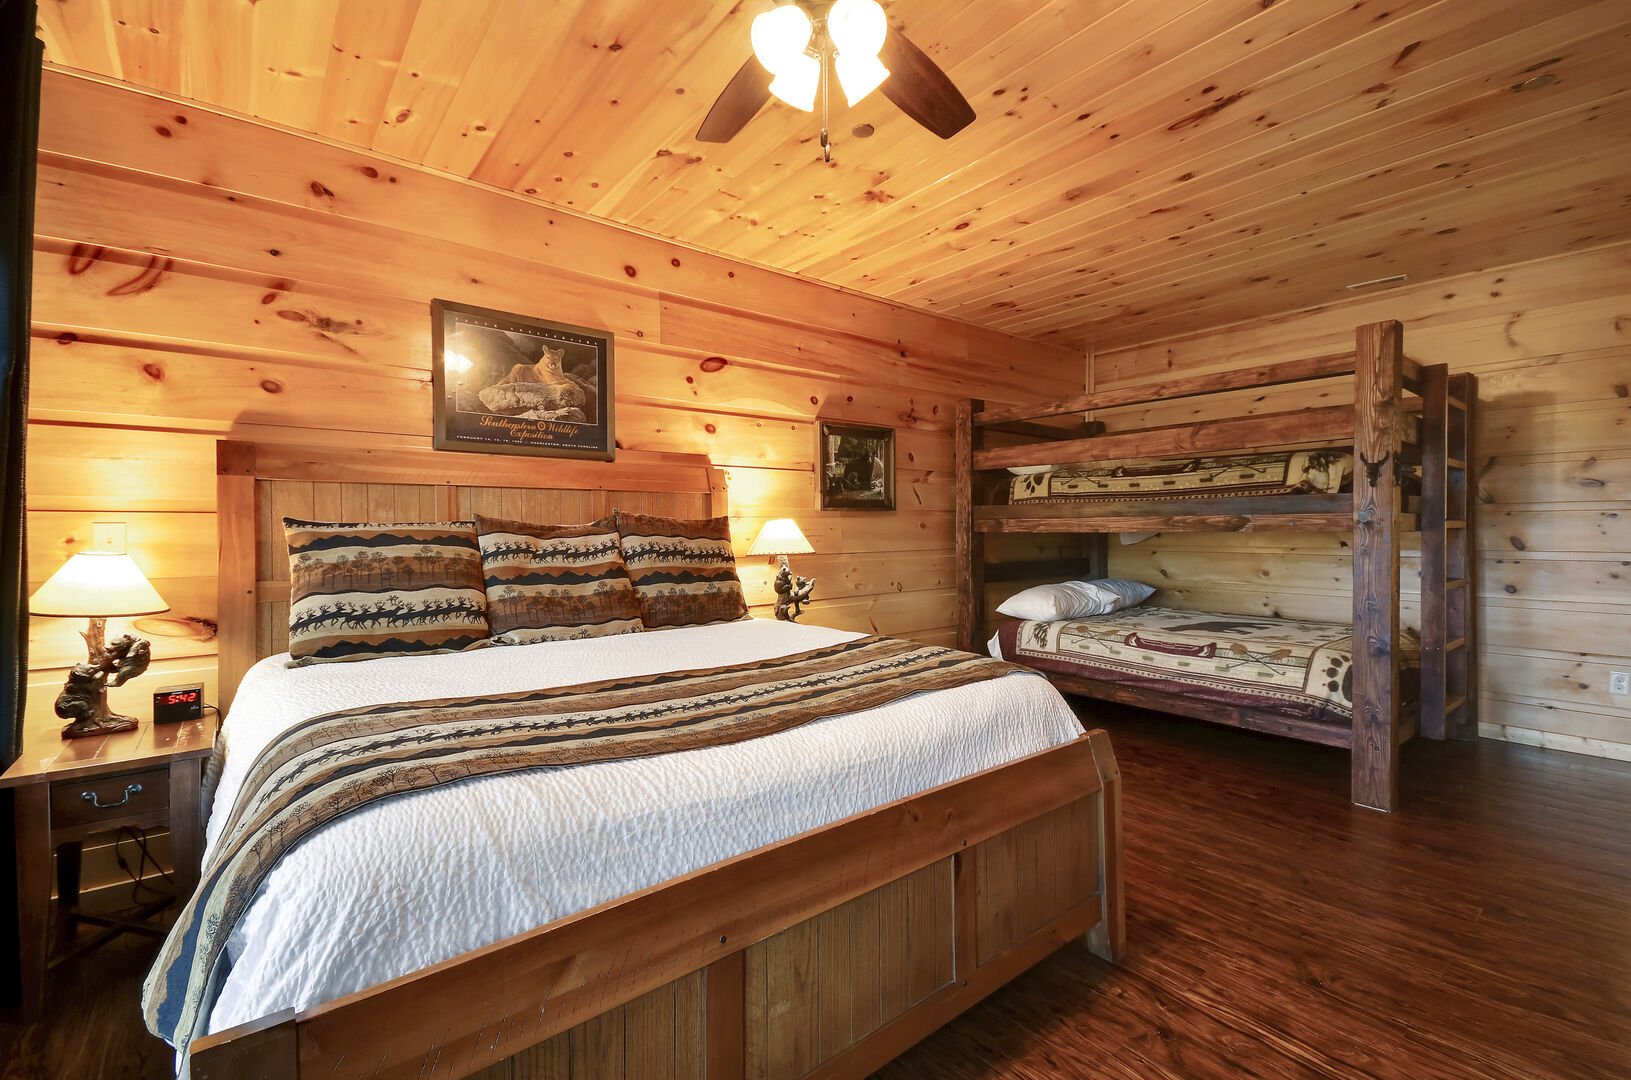 Spacious Bedroom Includes a Large Bed and One Bunk Bed.